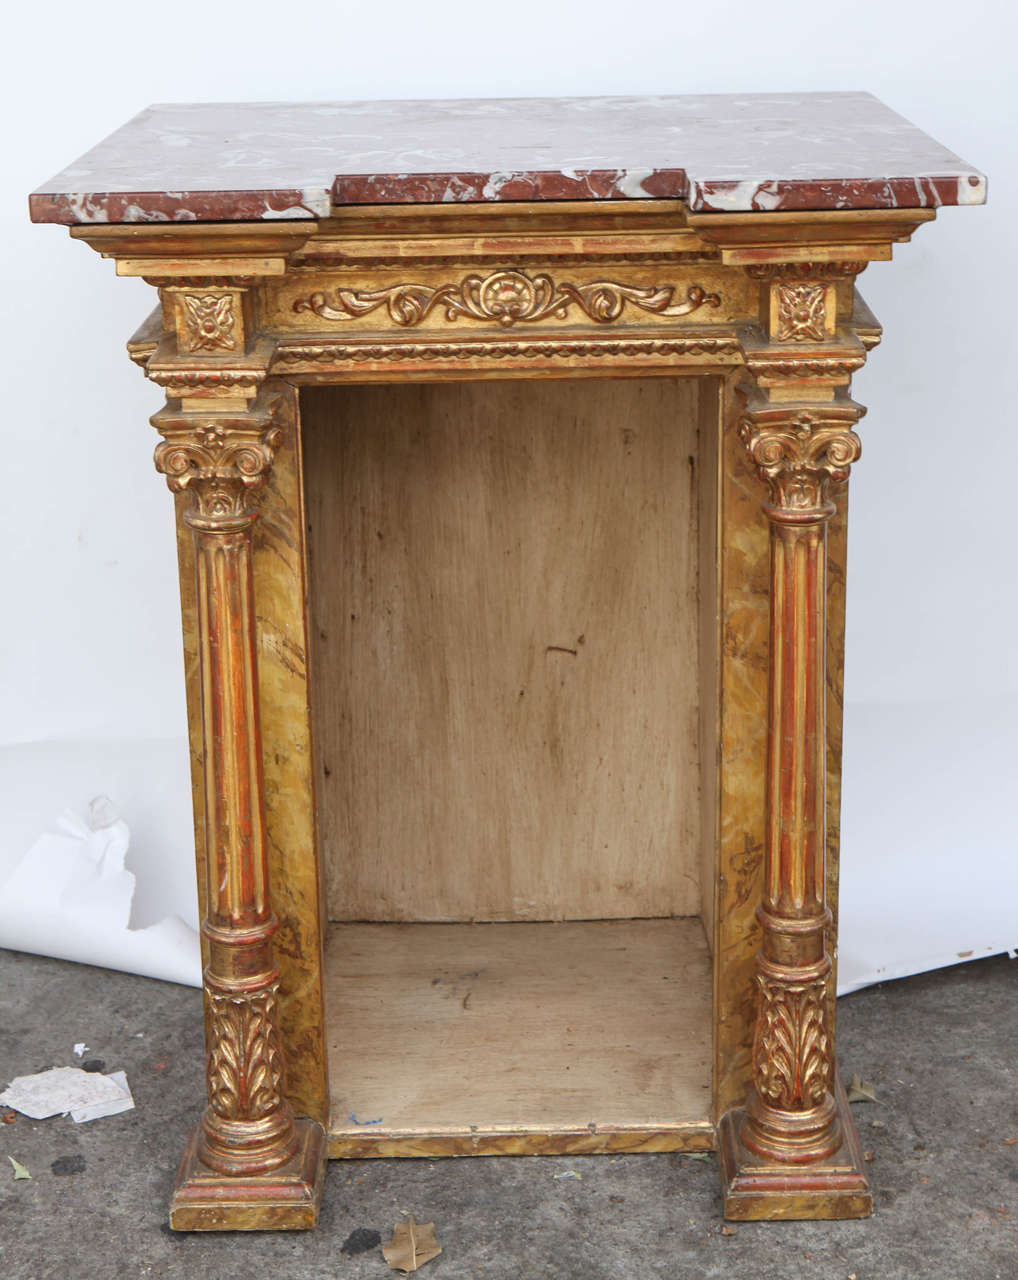 19th c. Italian Giltwood and Faux painted Display or End Table with Marble Top